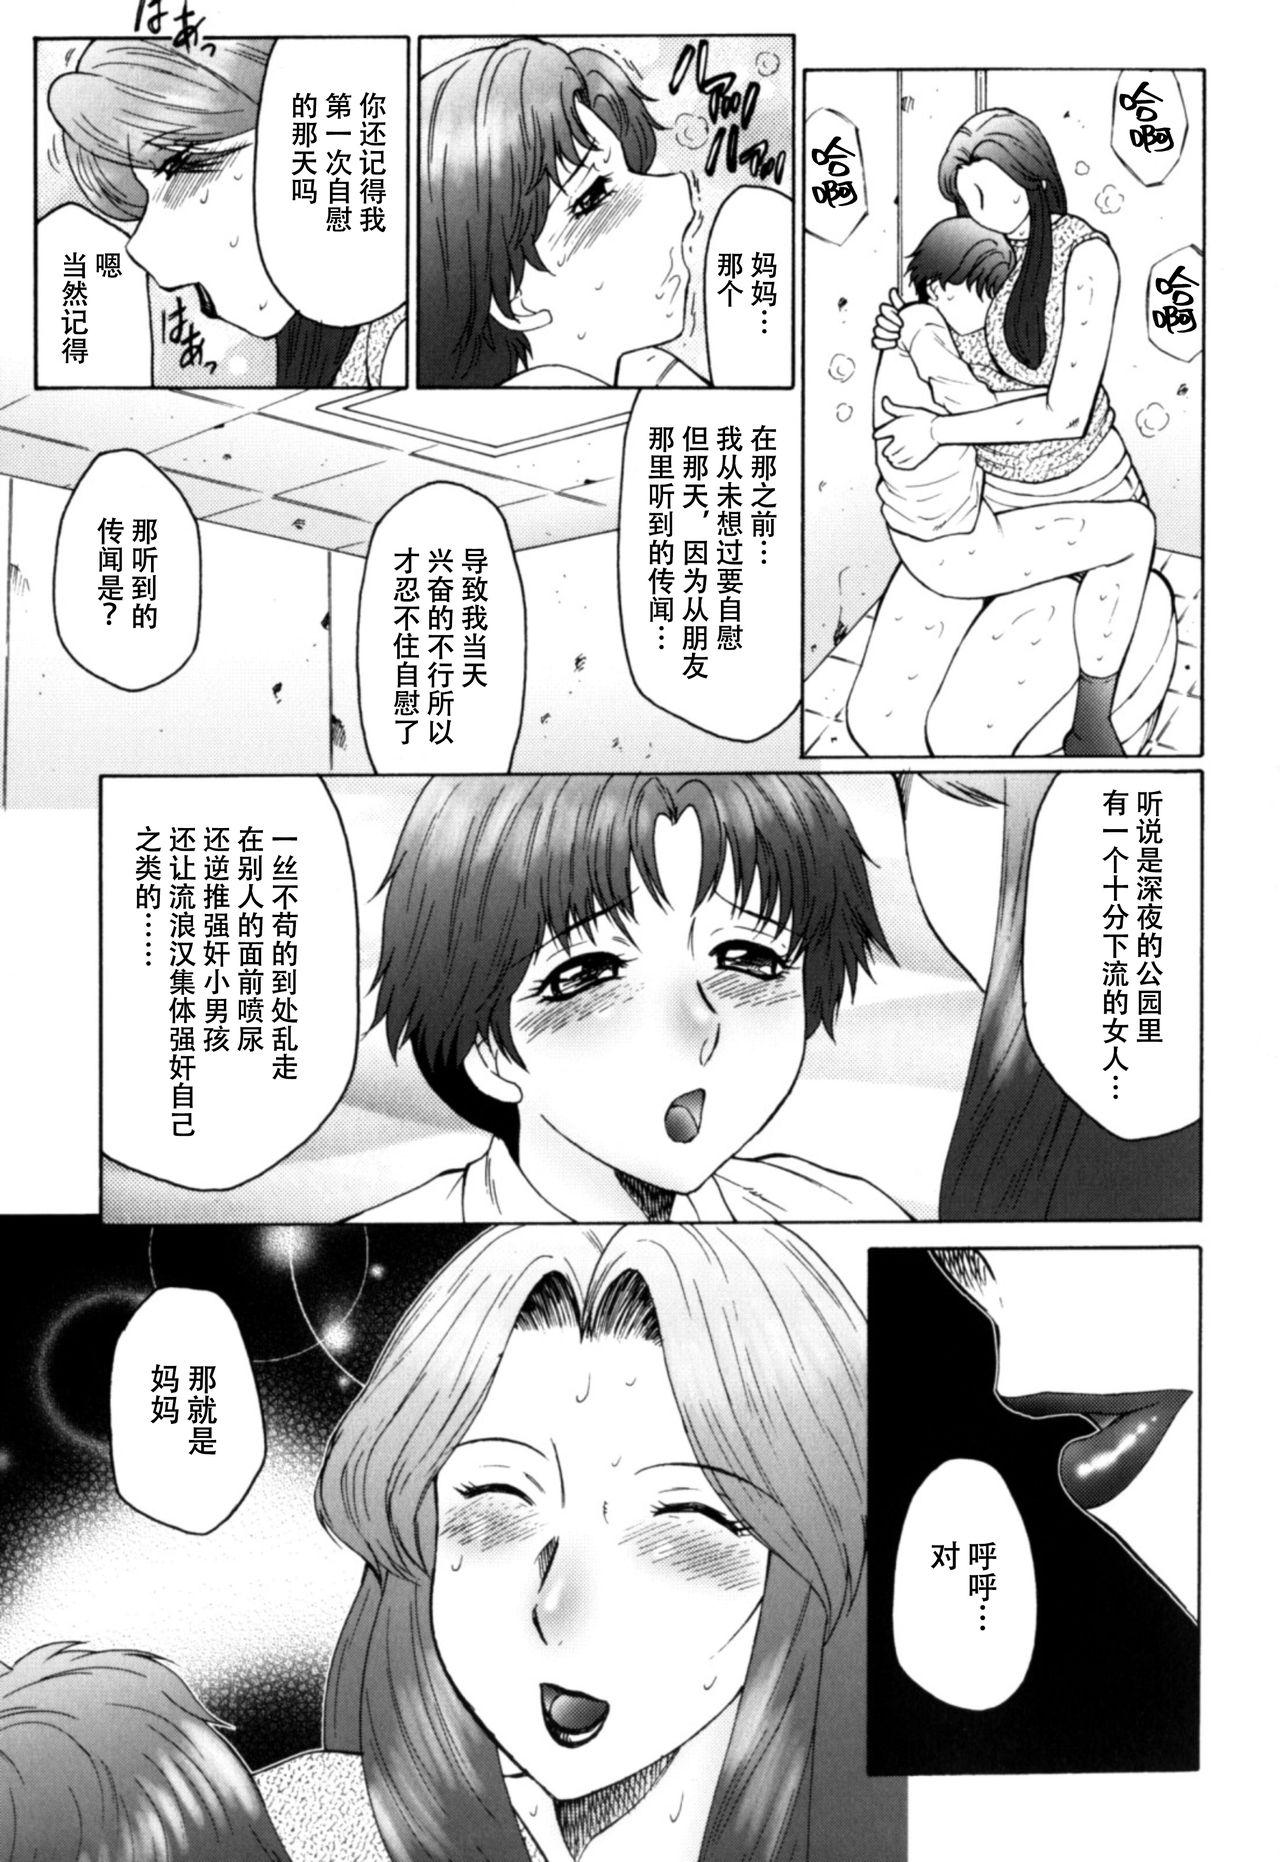 Delicia [Fuusen Club] Haha Mamire Ch. 9 [Chinese]【不可视汉化】 Bottom - Page 6